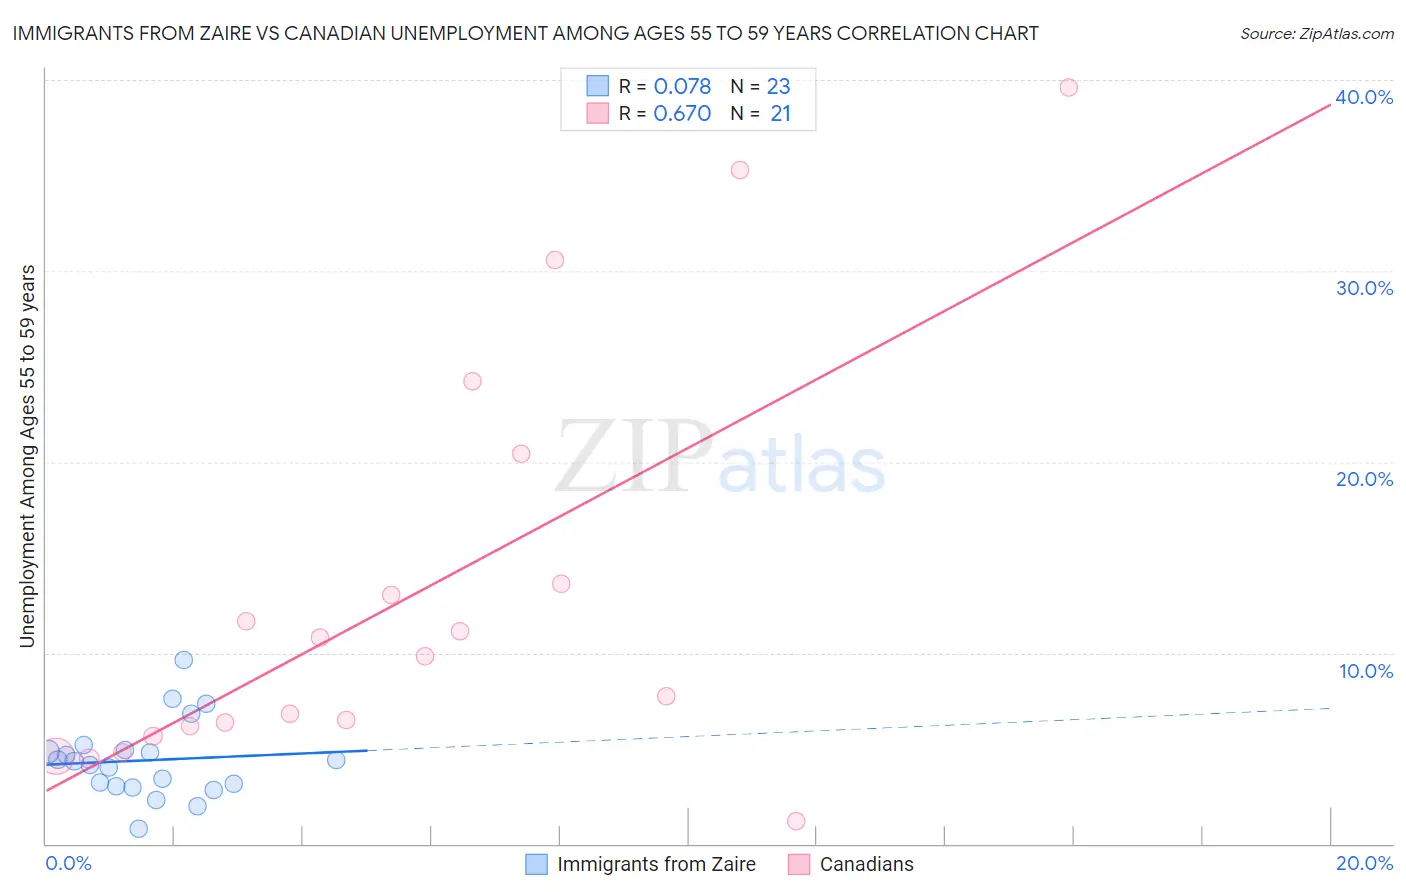 Immigrants from Zaire vs Canadian Unemployment Among Ages 55 to 59 years